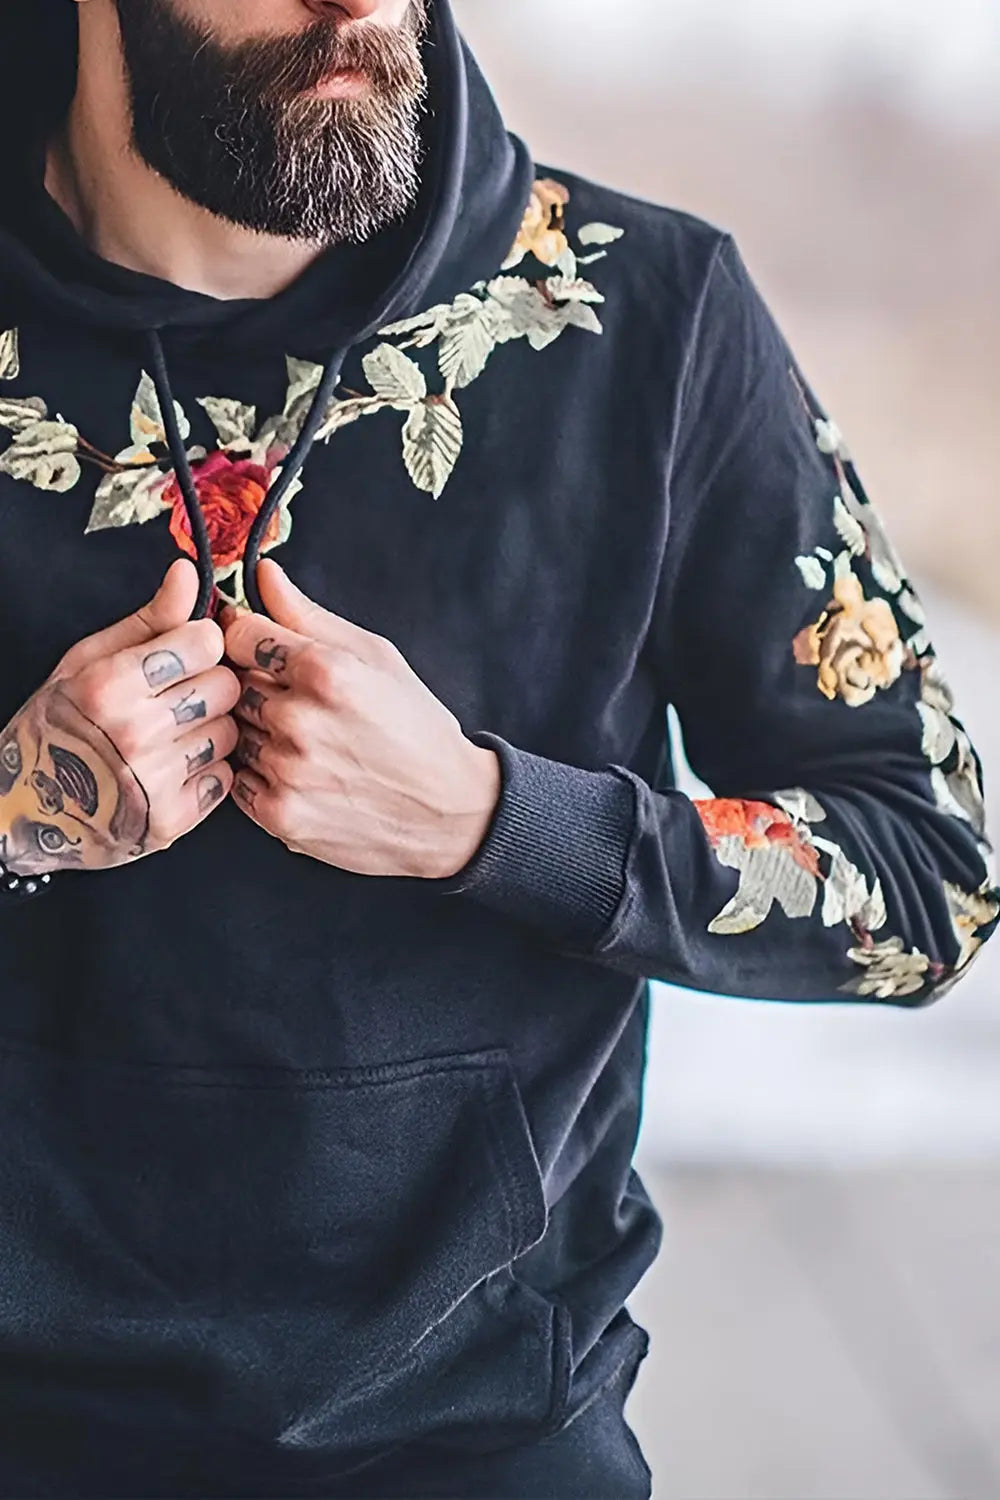 Hoodie With Roses - Black - Strange Clothes